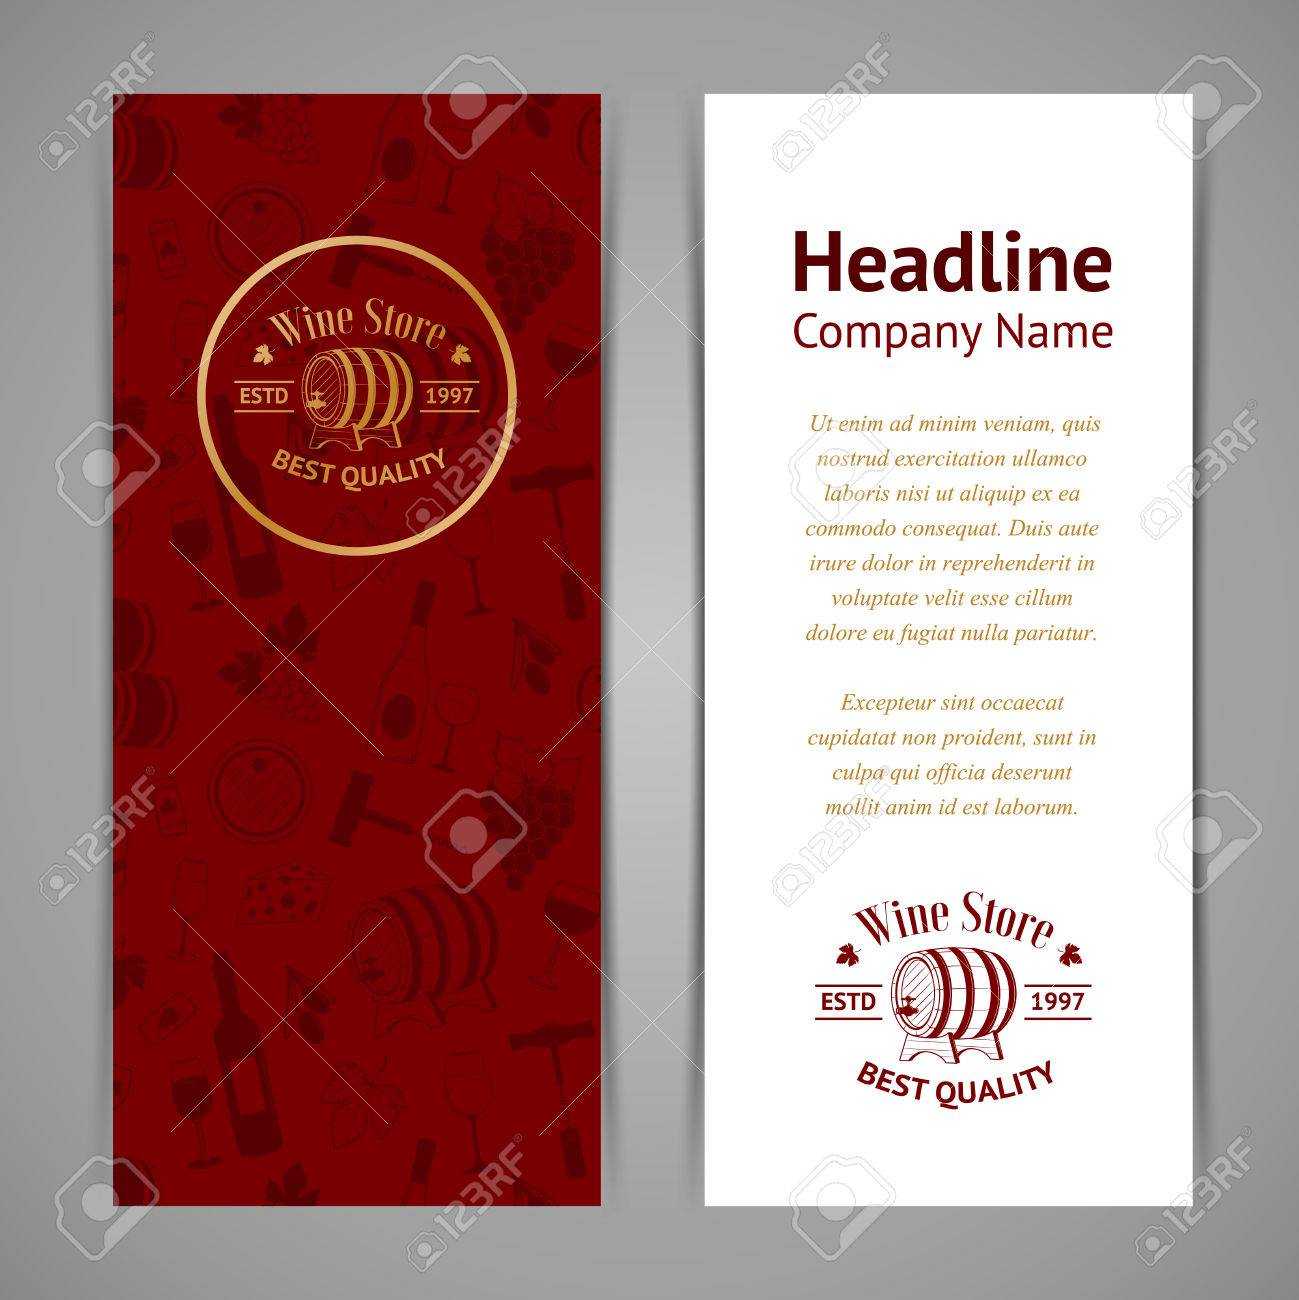 Set Of Business Cards. Templates For Wine Company In Company Business Cards Templates